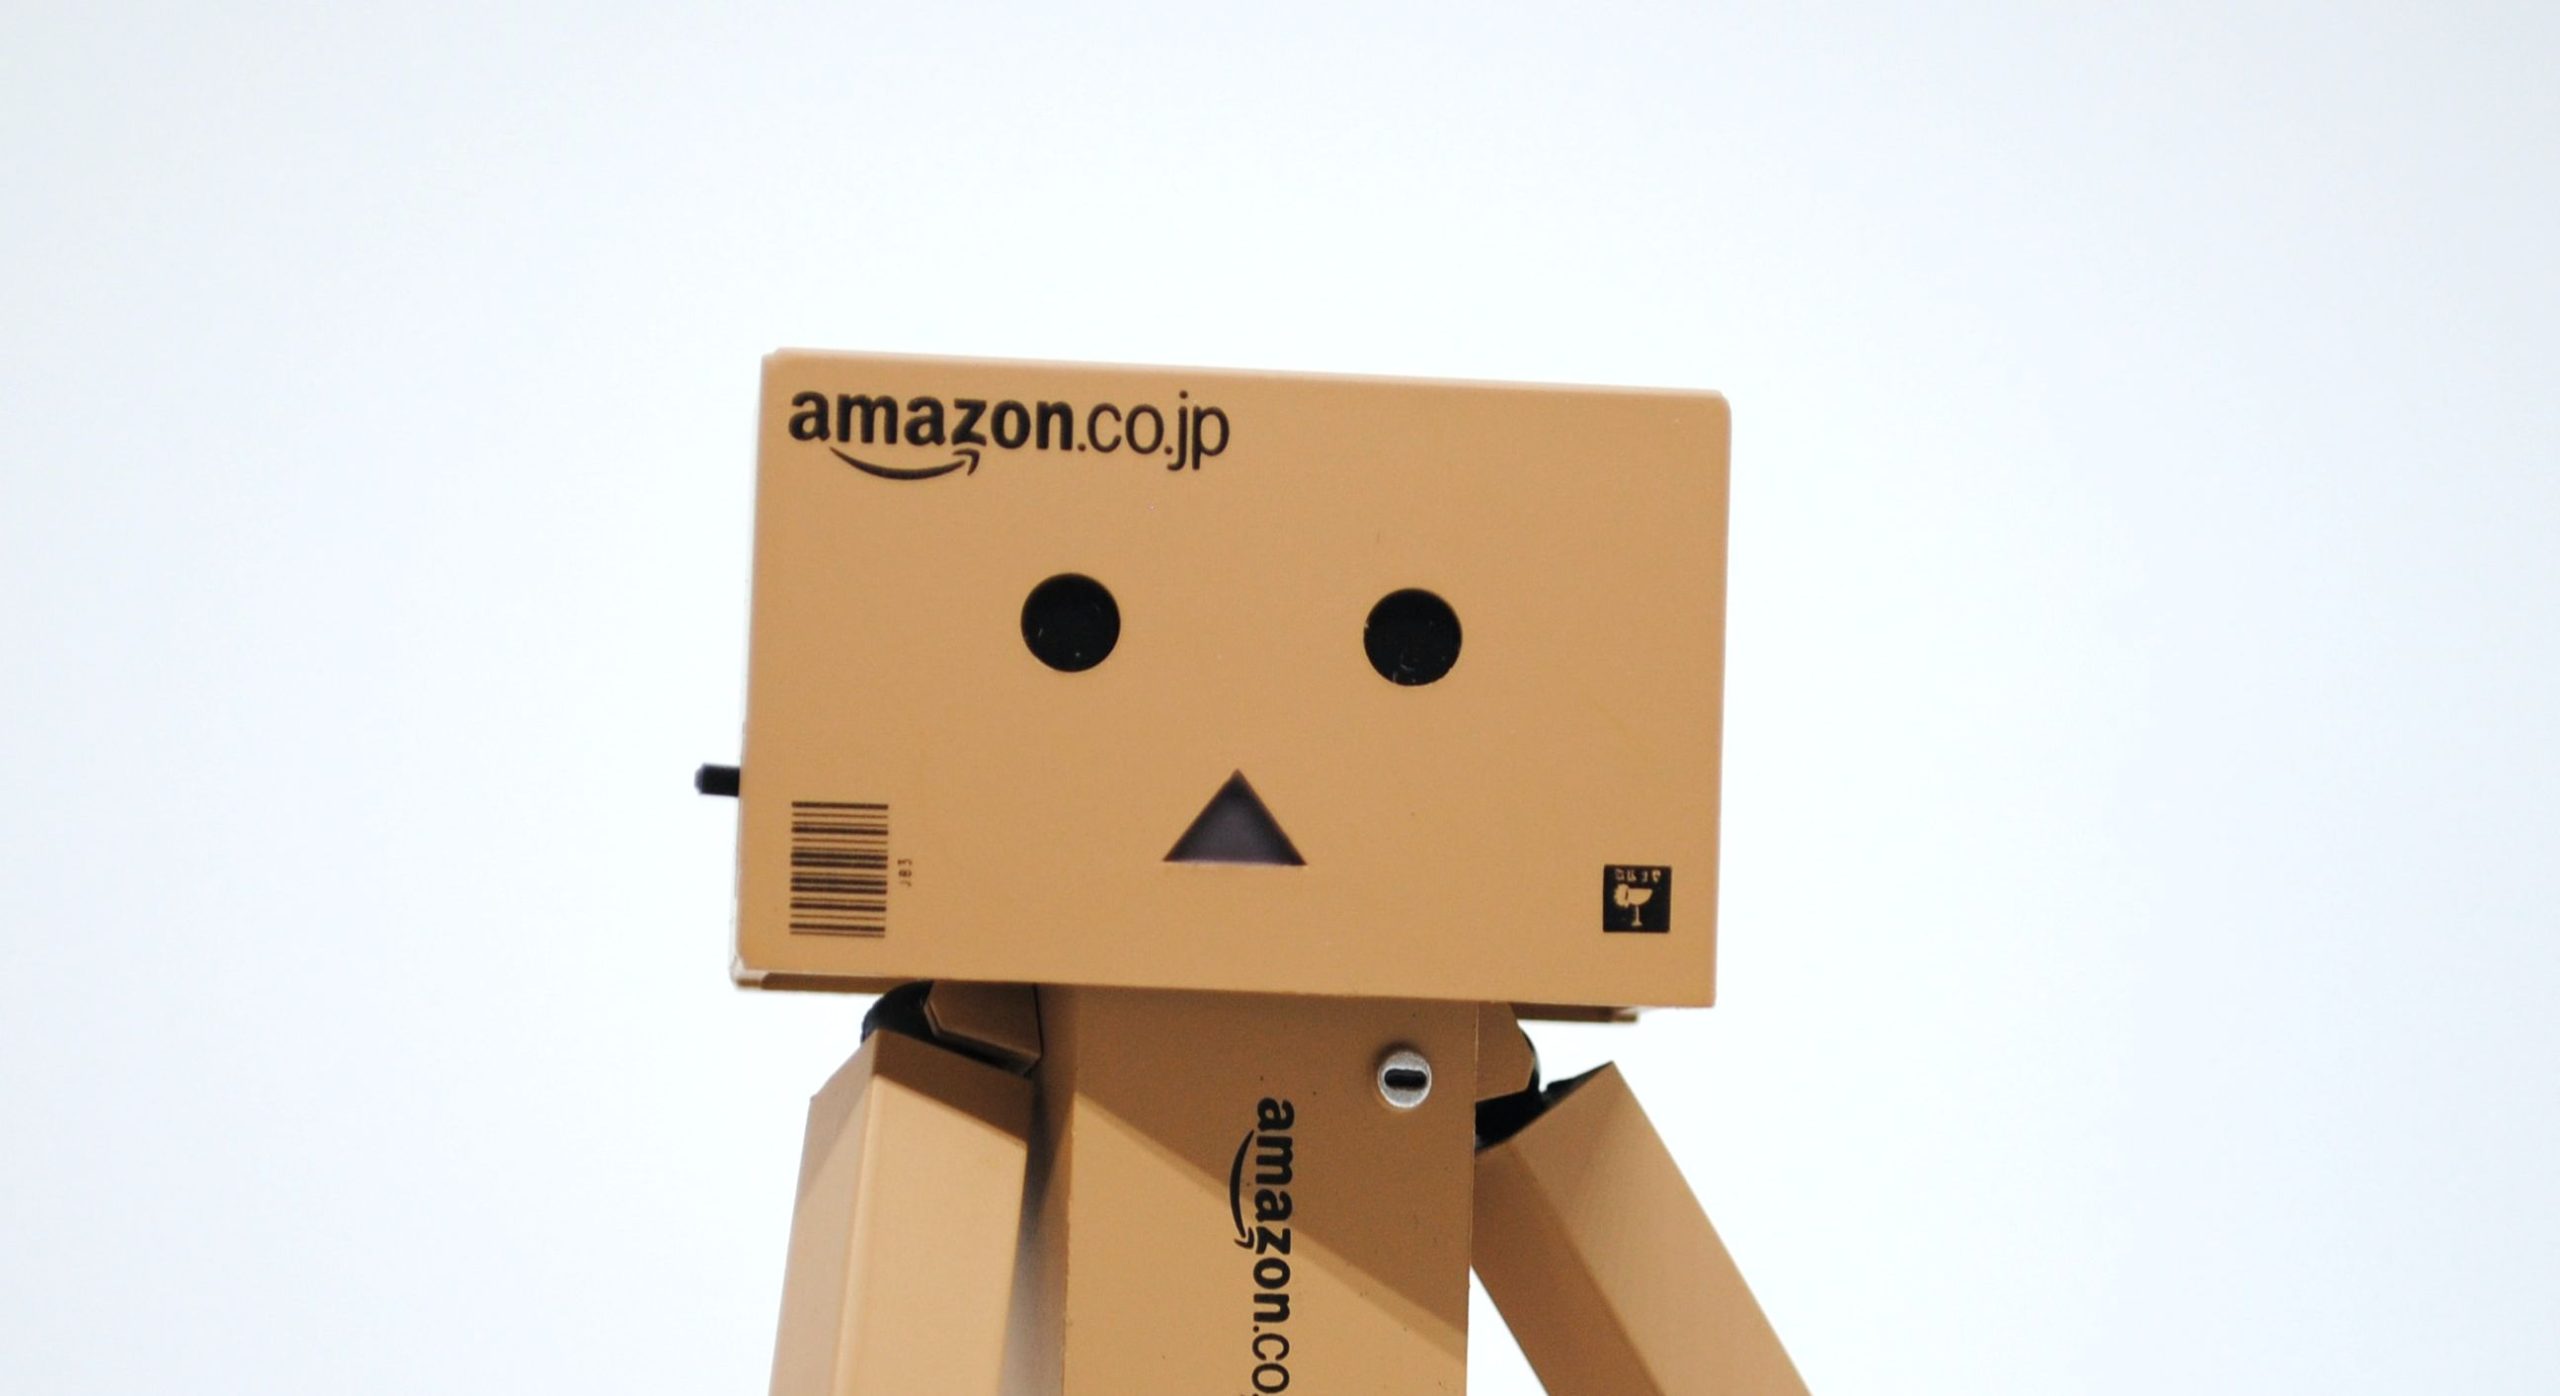 Discover why the $1.4 billion Amazon-iRobot deal failed: EU opposition, regulatory hurdles, anticompetitive concerns, layoffs, and more.